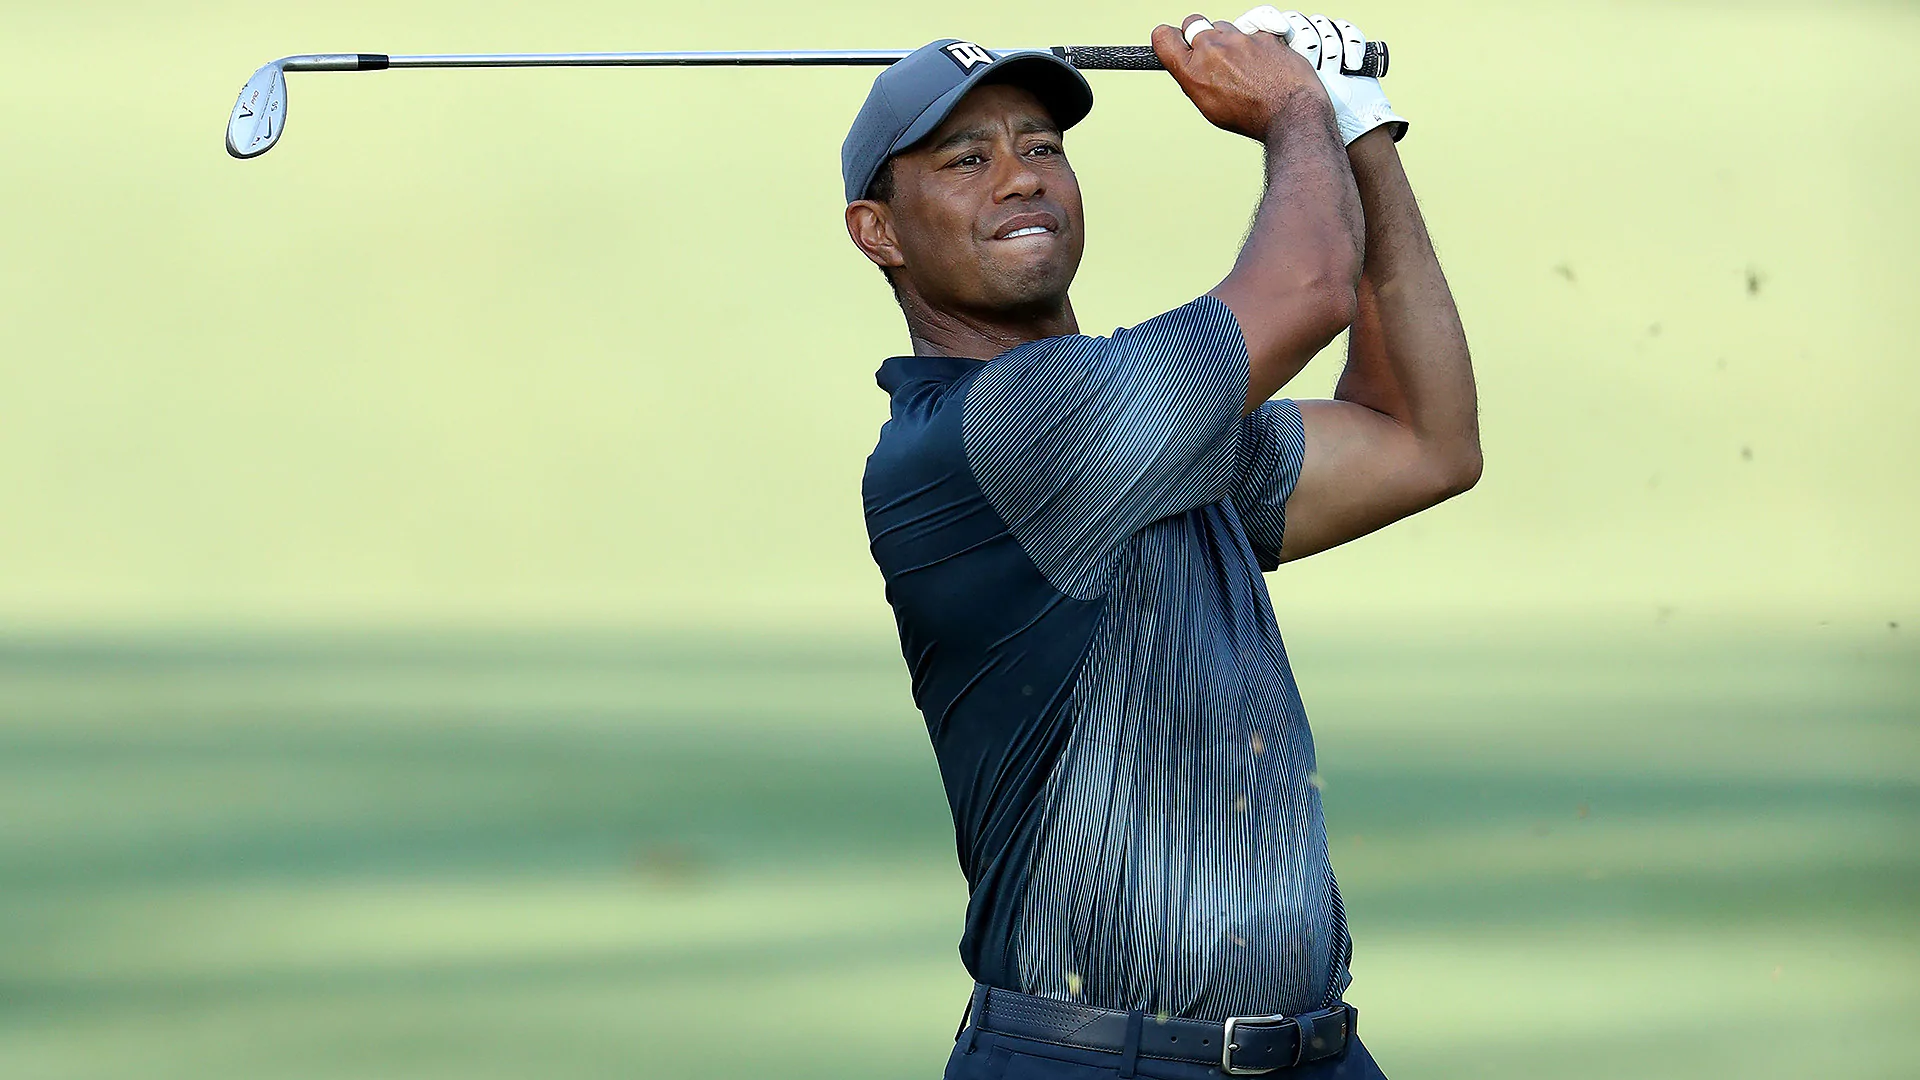 Woods 'didn’t quite swing it right' in Round 2